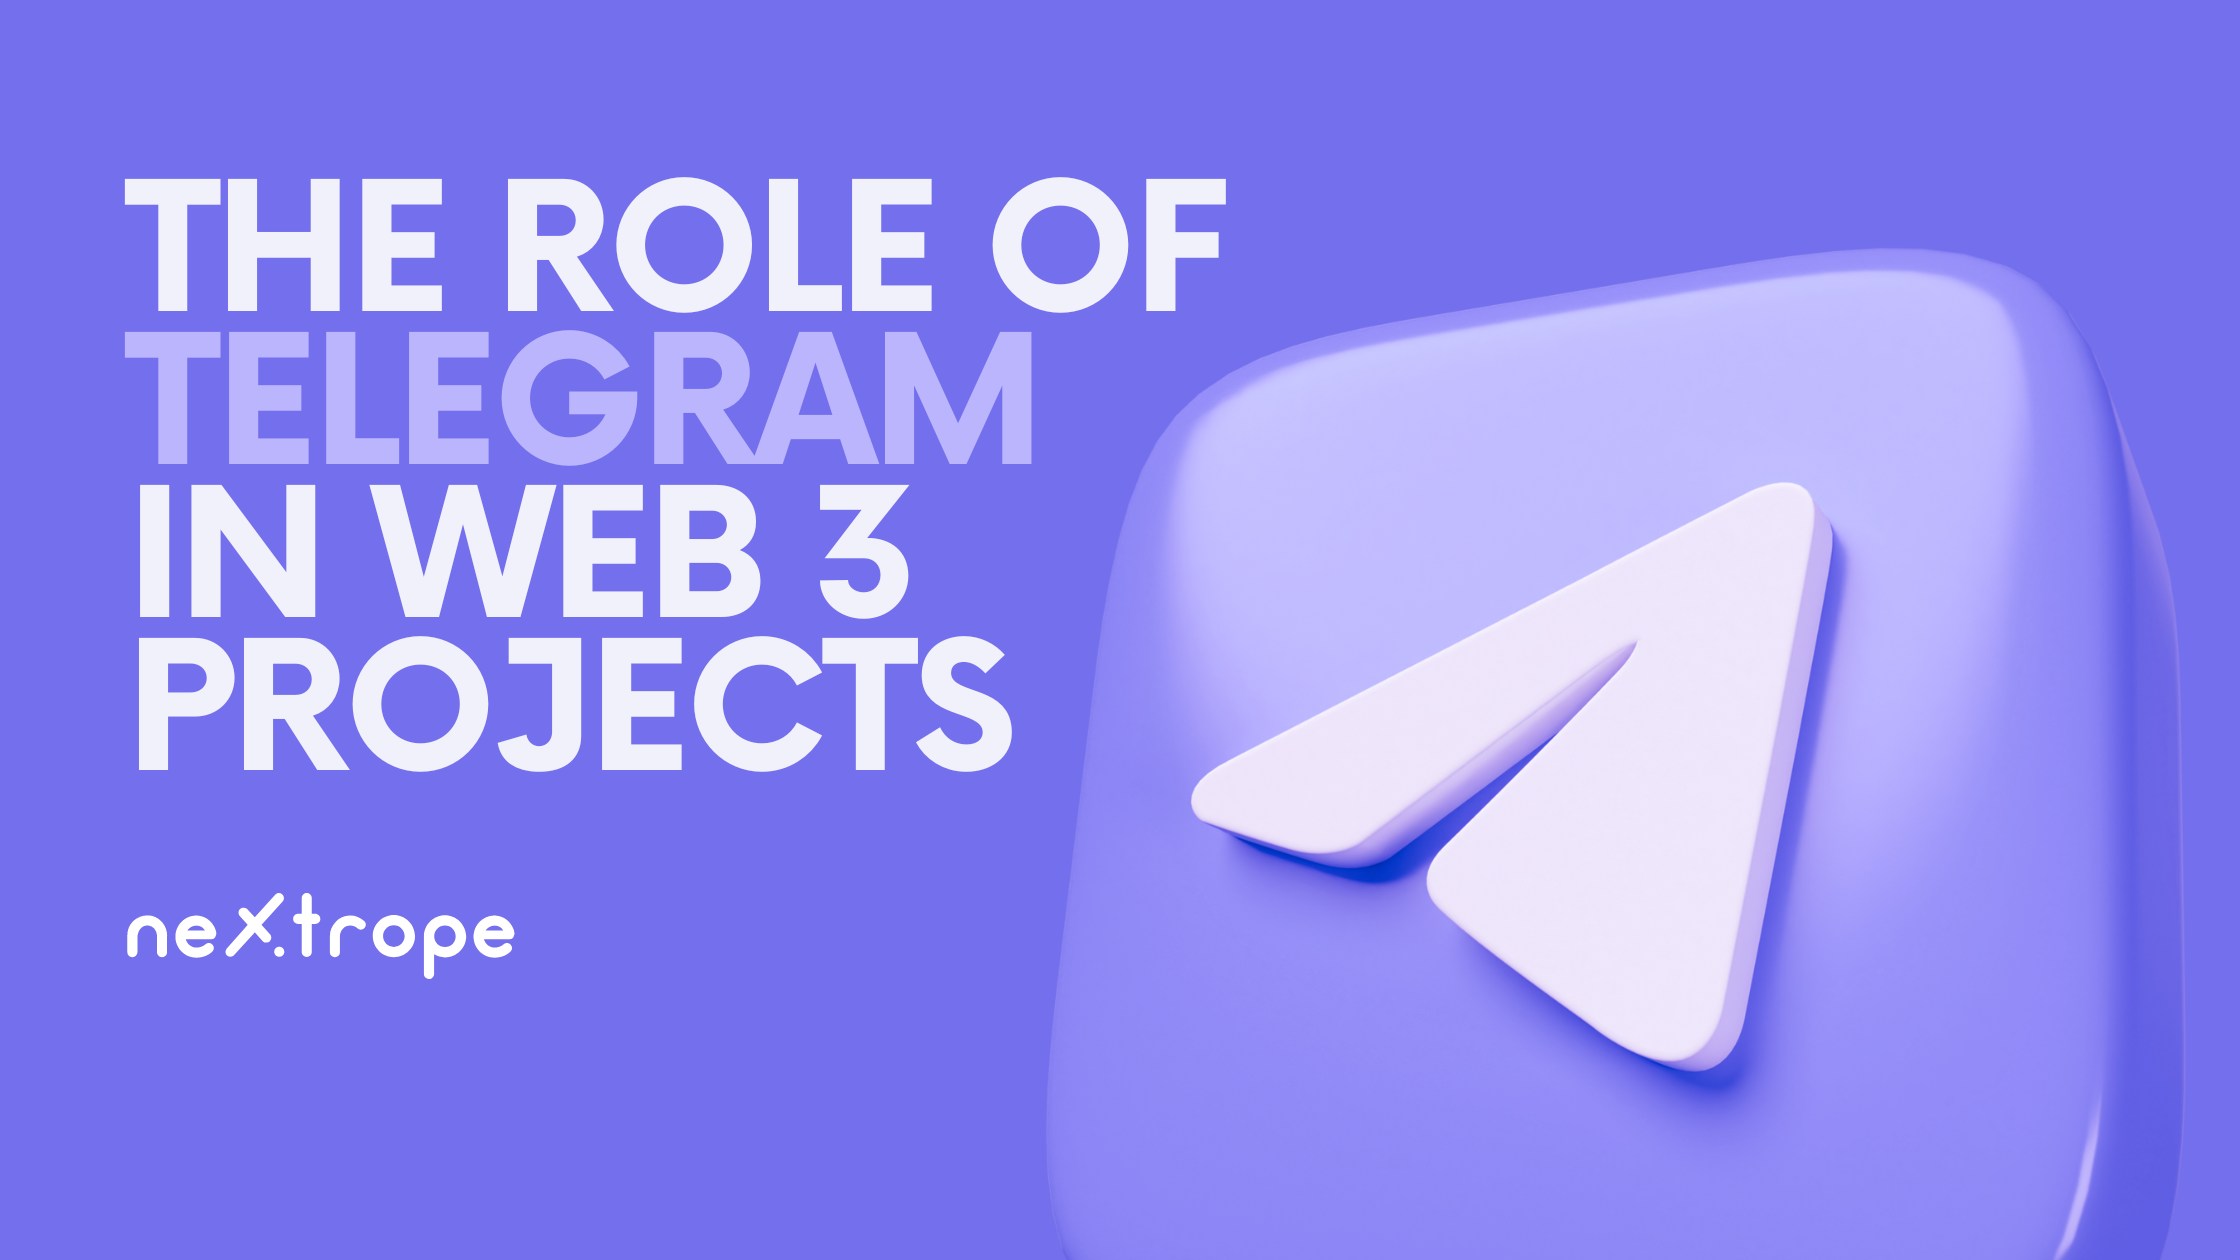 The Role of Telegram in Web 3 Projects